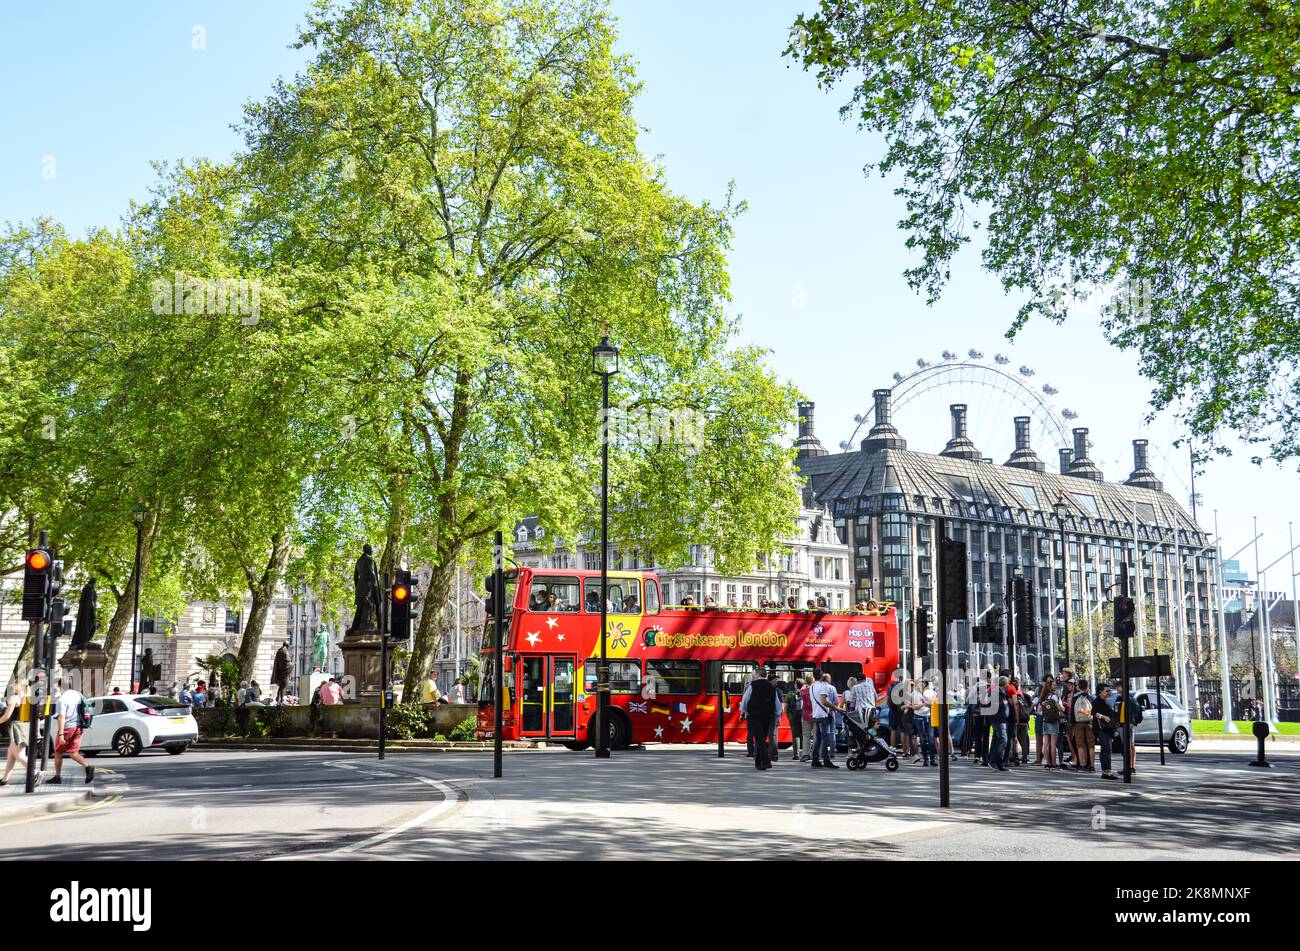 People standing on the the streets of London, UK with a red bus, trees and a building in the background. Stock Photo